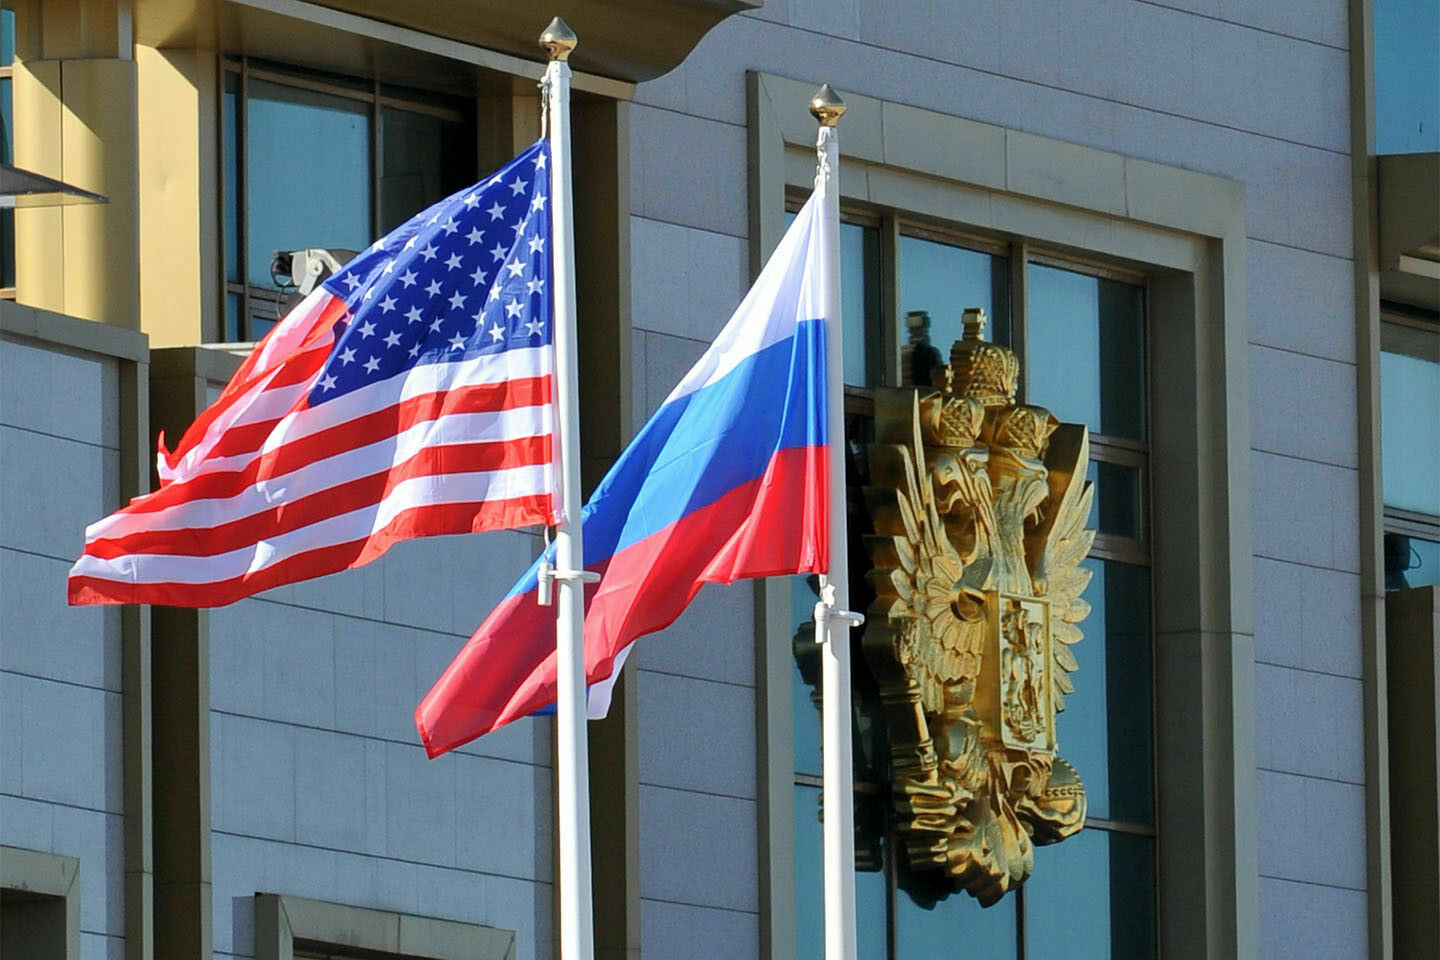 Putin allowed for the exchange of prisoners between Russia and the United States